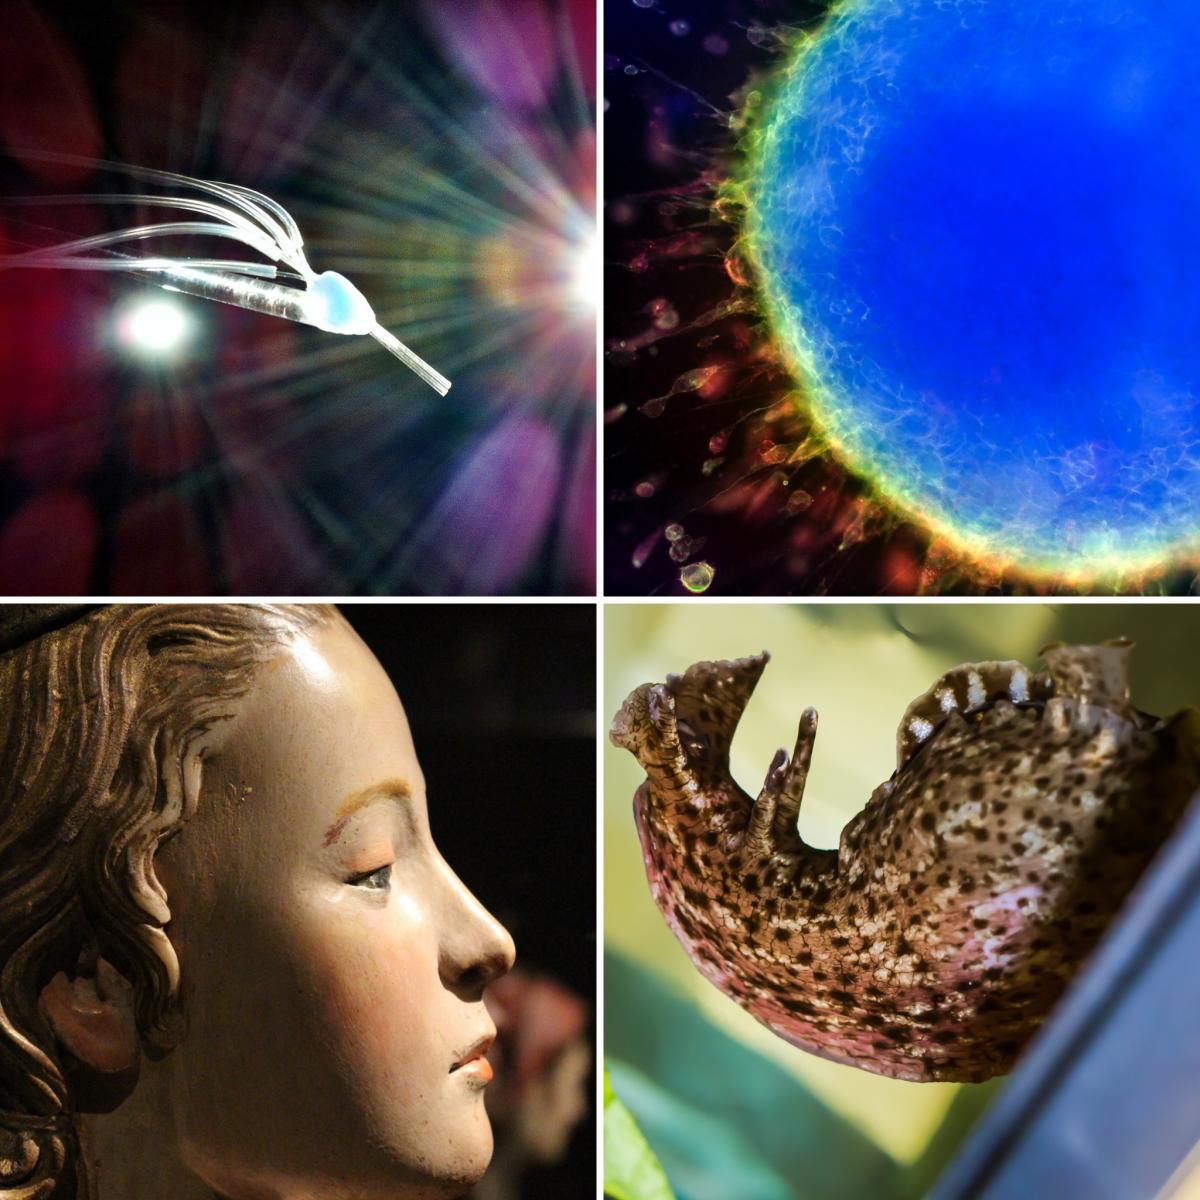 [4 winning images from the 2015 - 2016 Art of Research photo contest]